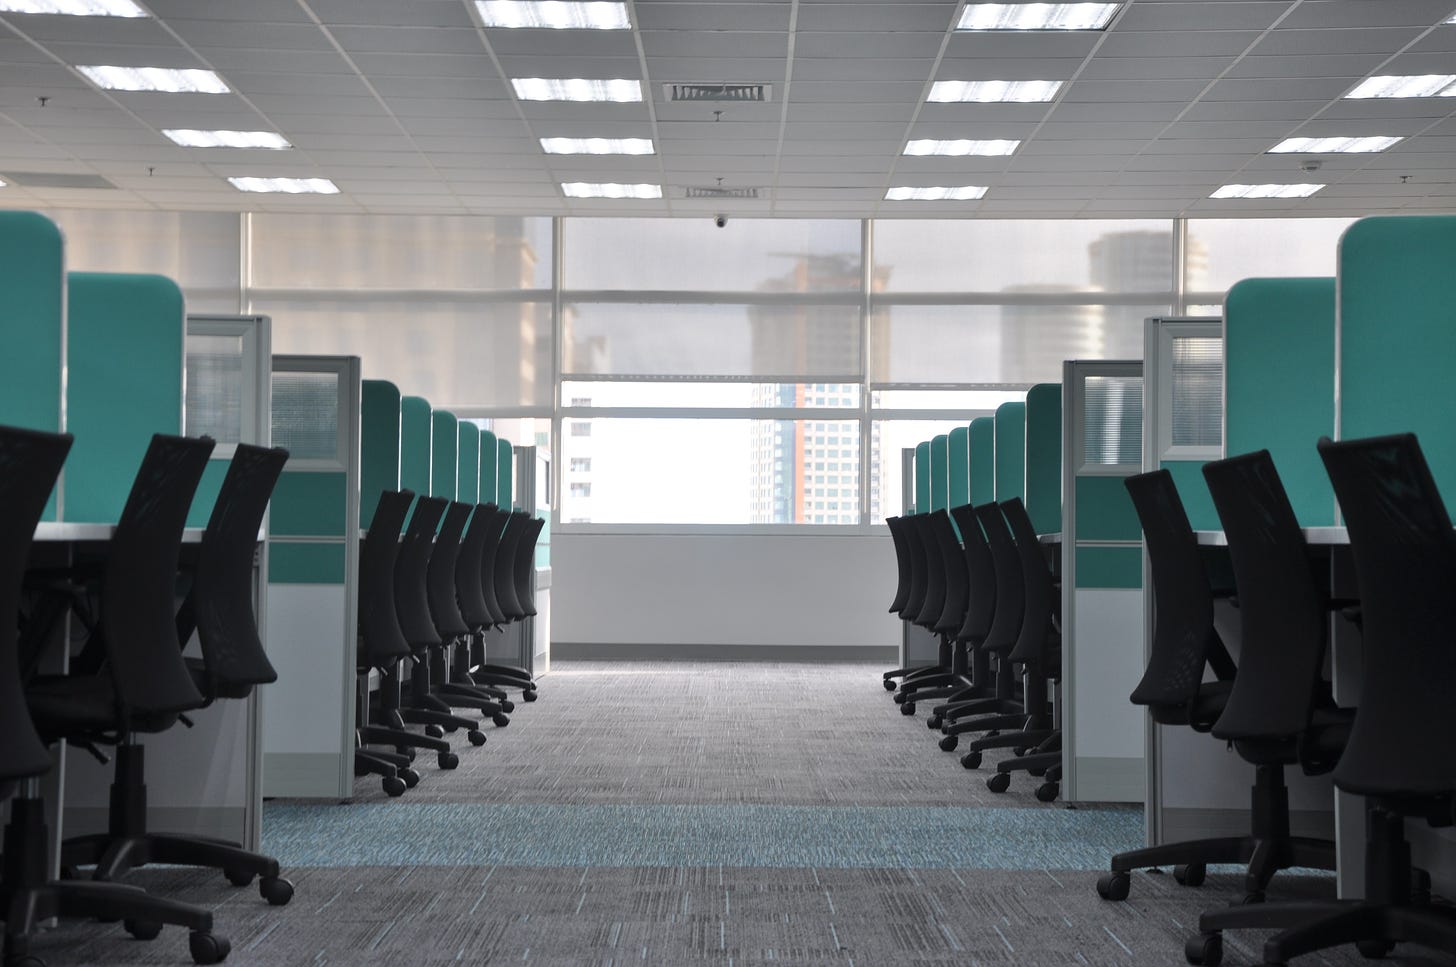 enervating office cubicles